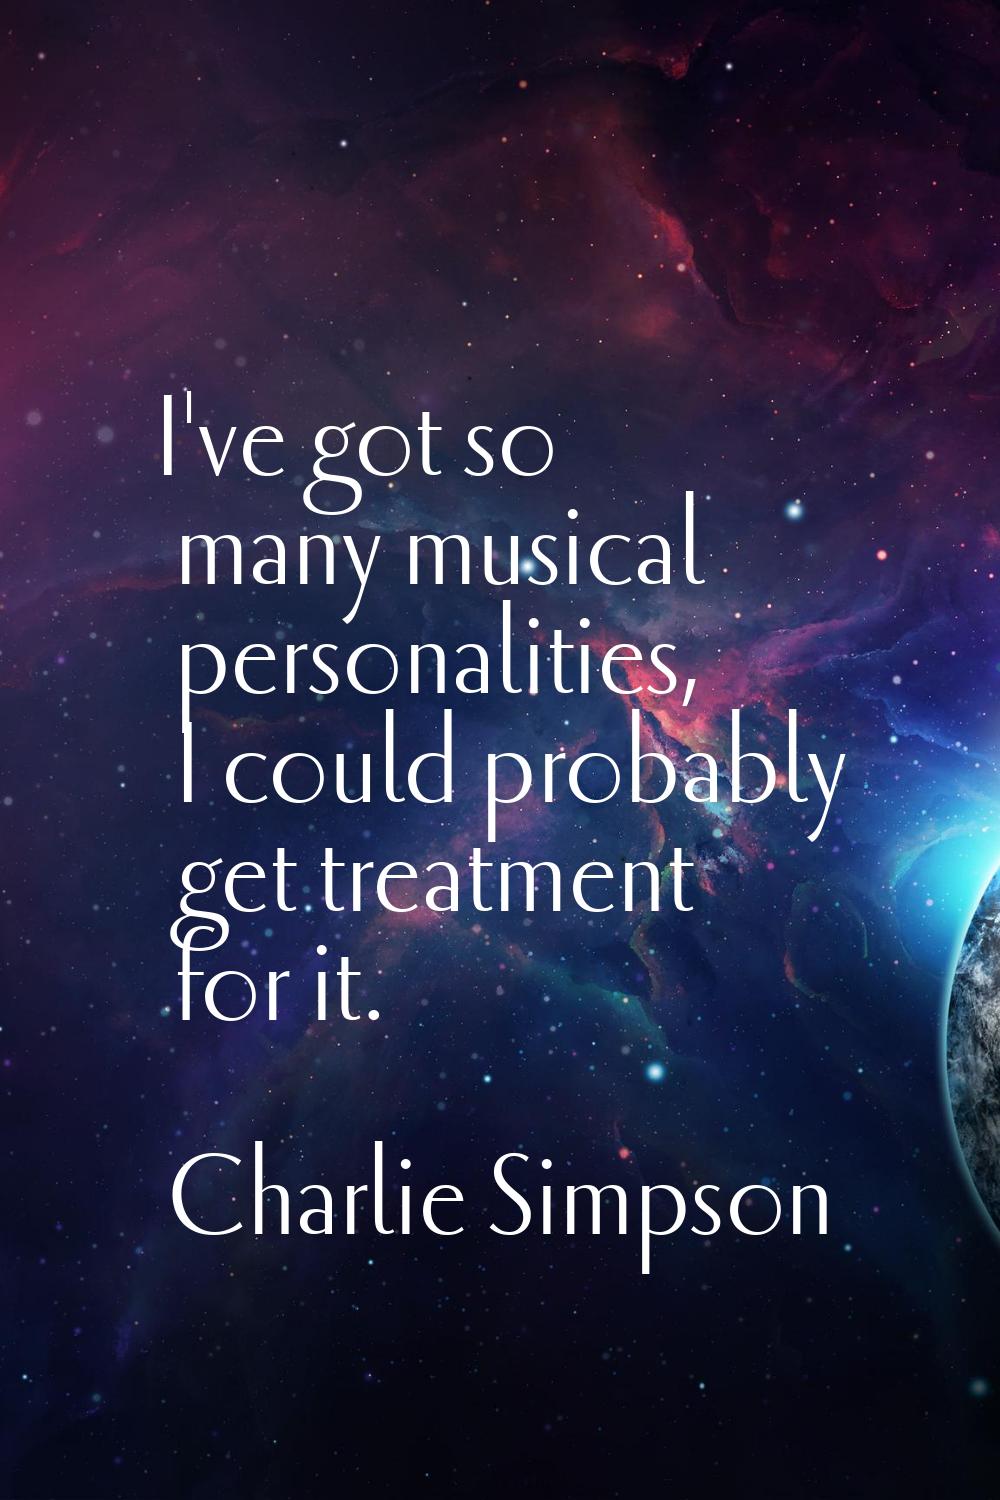 I've got so many musical personalities, I could probably get treatment for it.